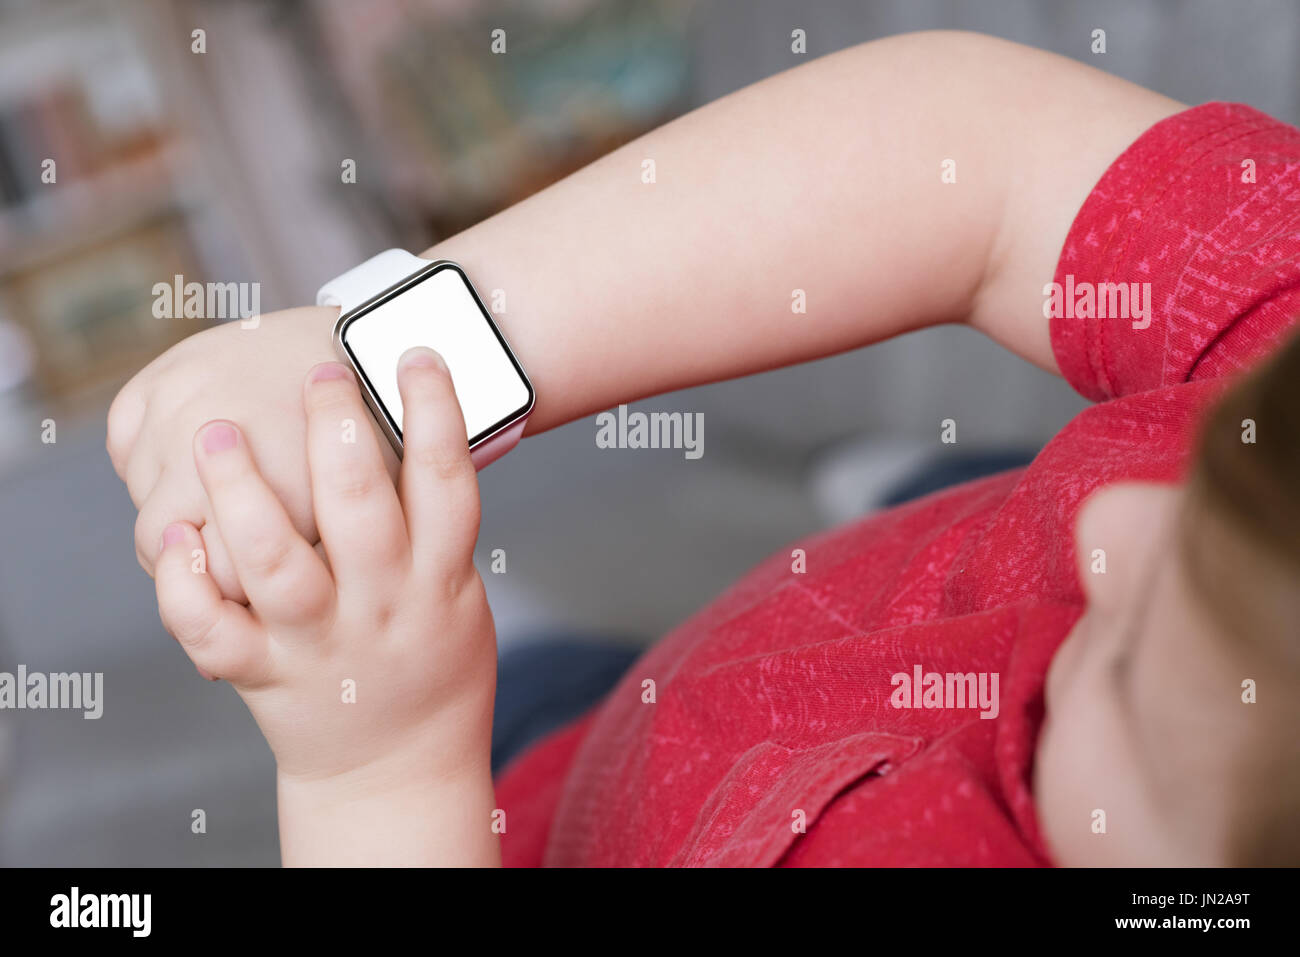 Overhead view of boy using smart watch while standing at home Stock Photo